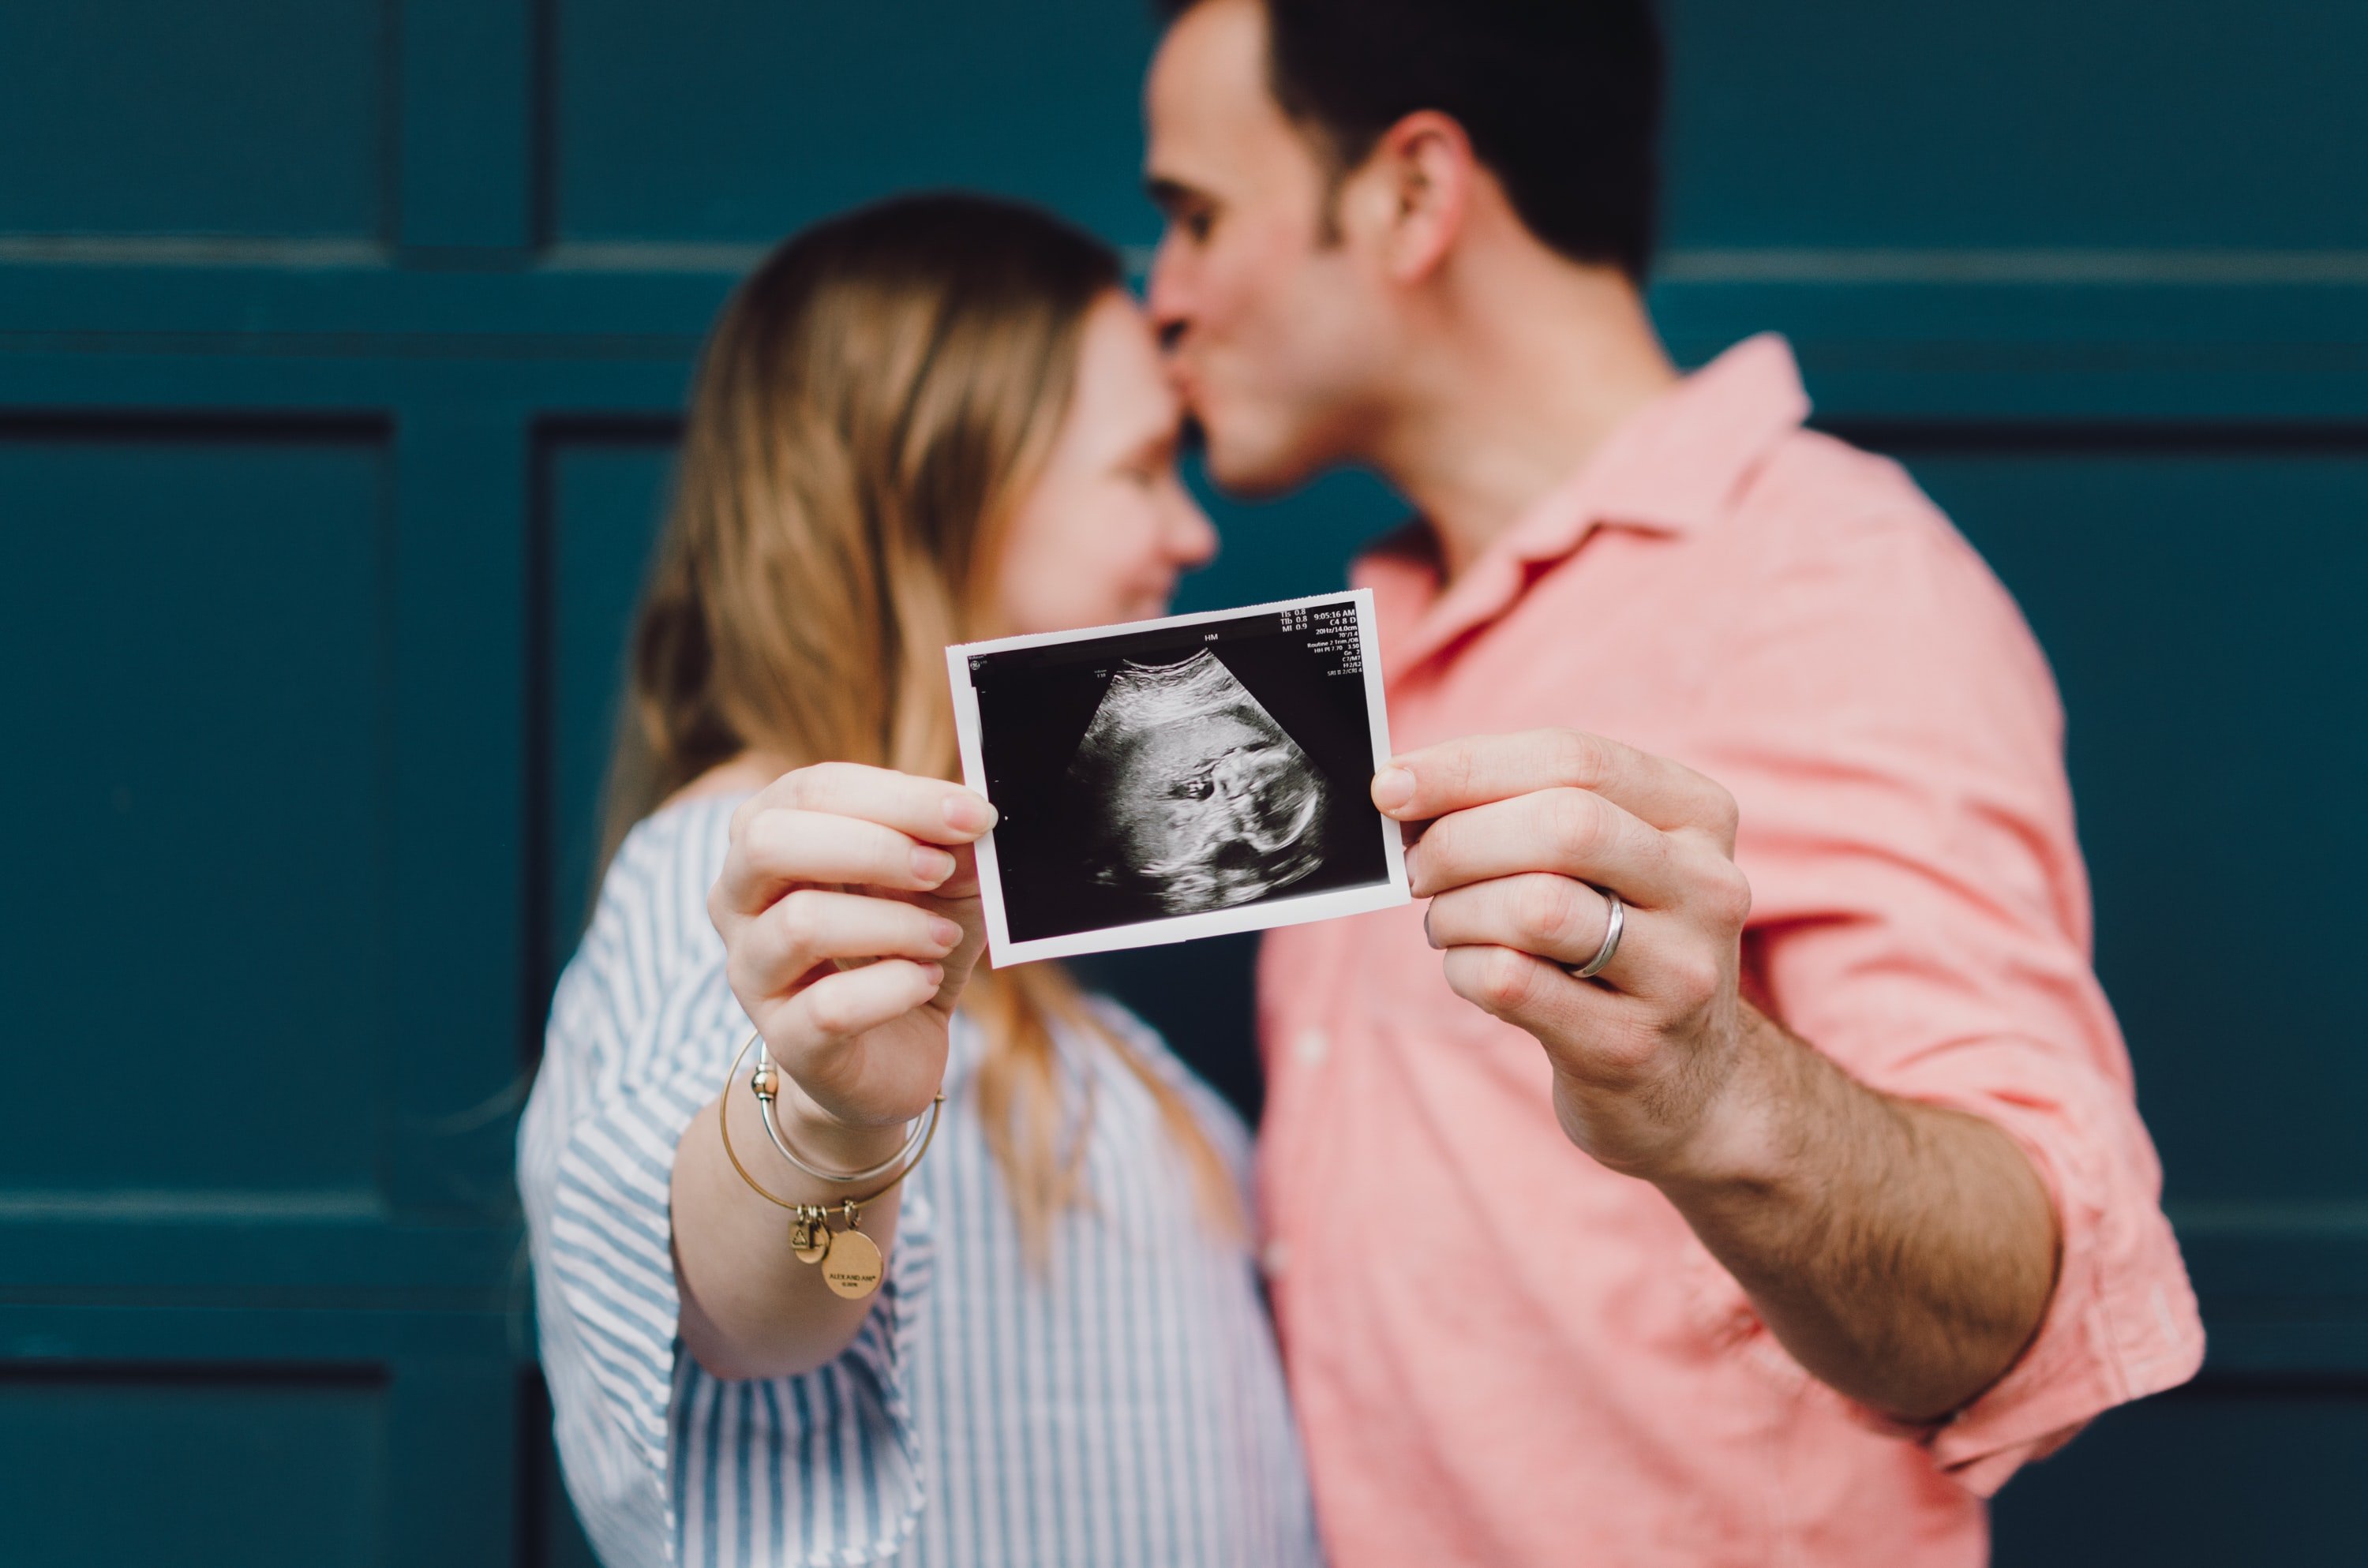 The guy's parents always resented OP, but nothing outdid their reaction to her unplanned pregnancy. | Source: Unsplash